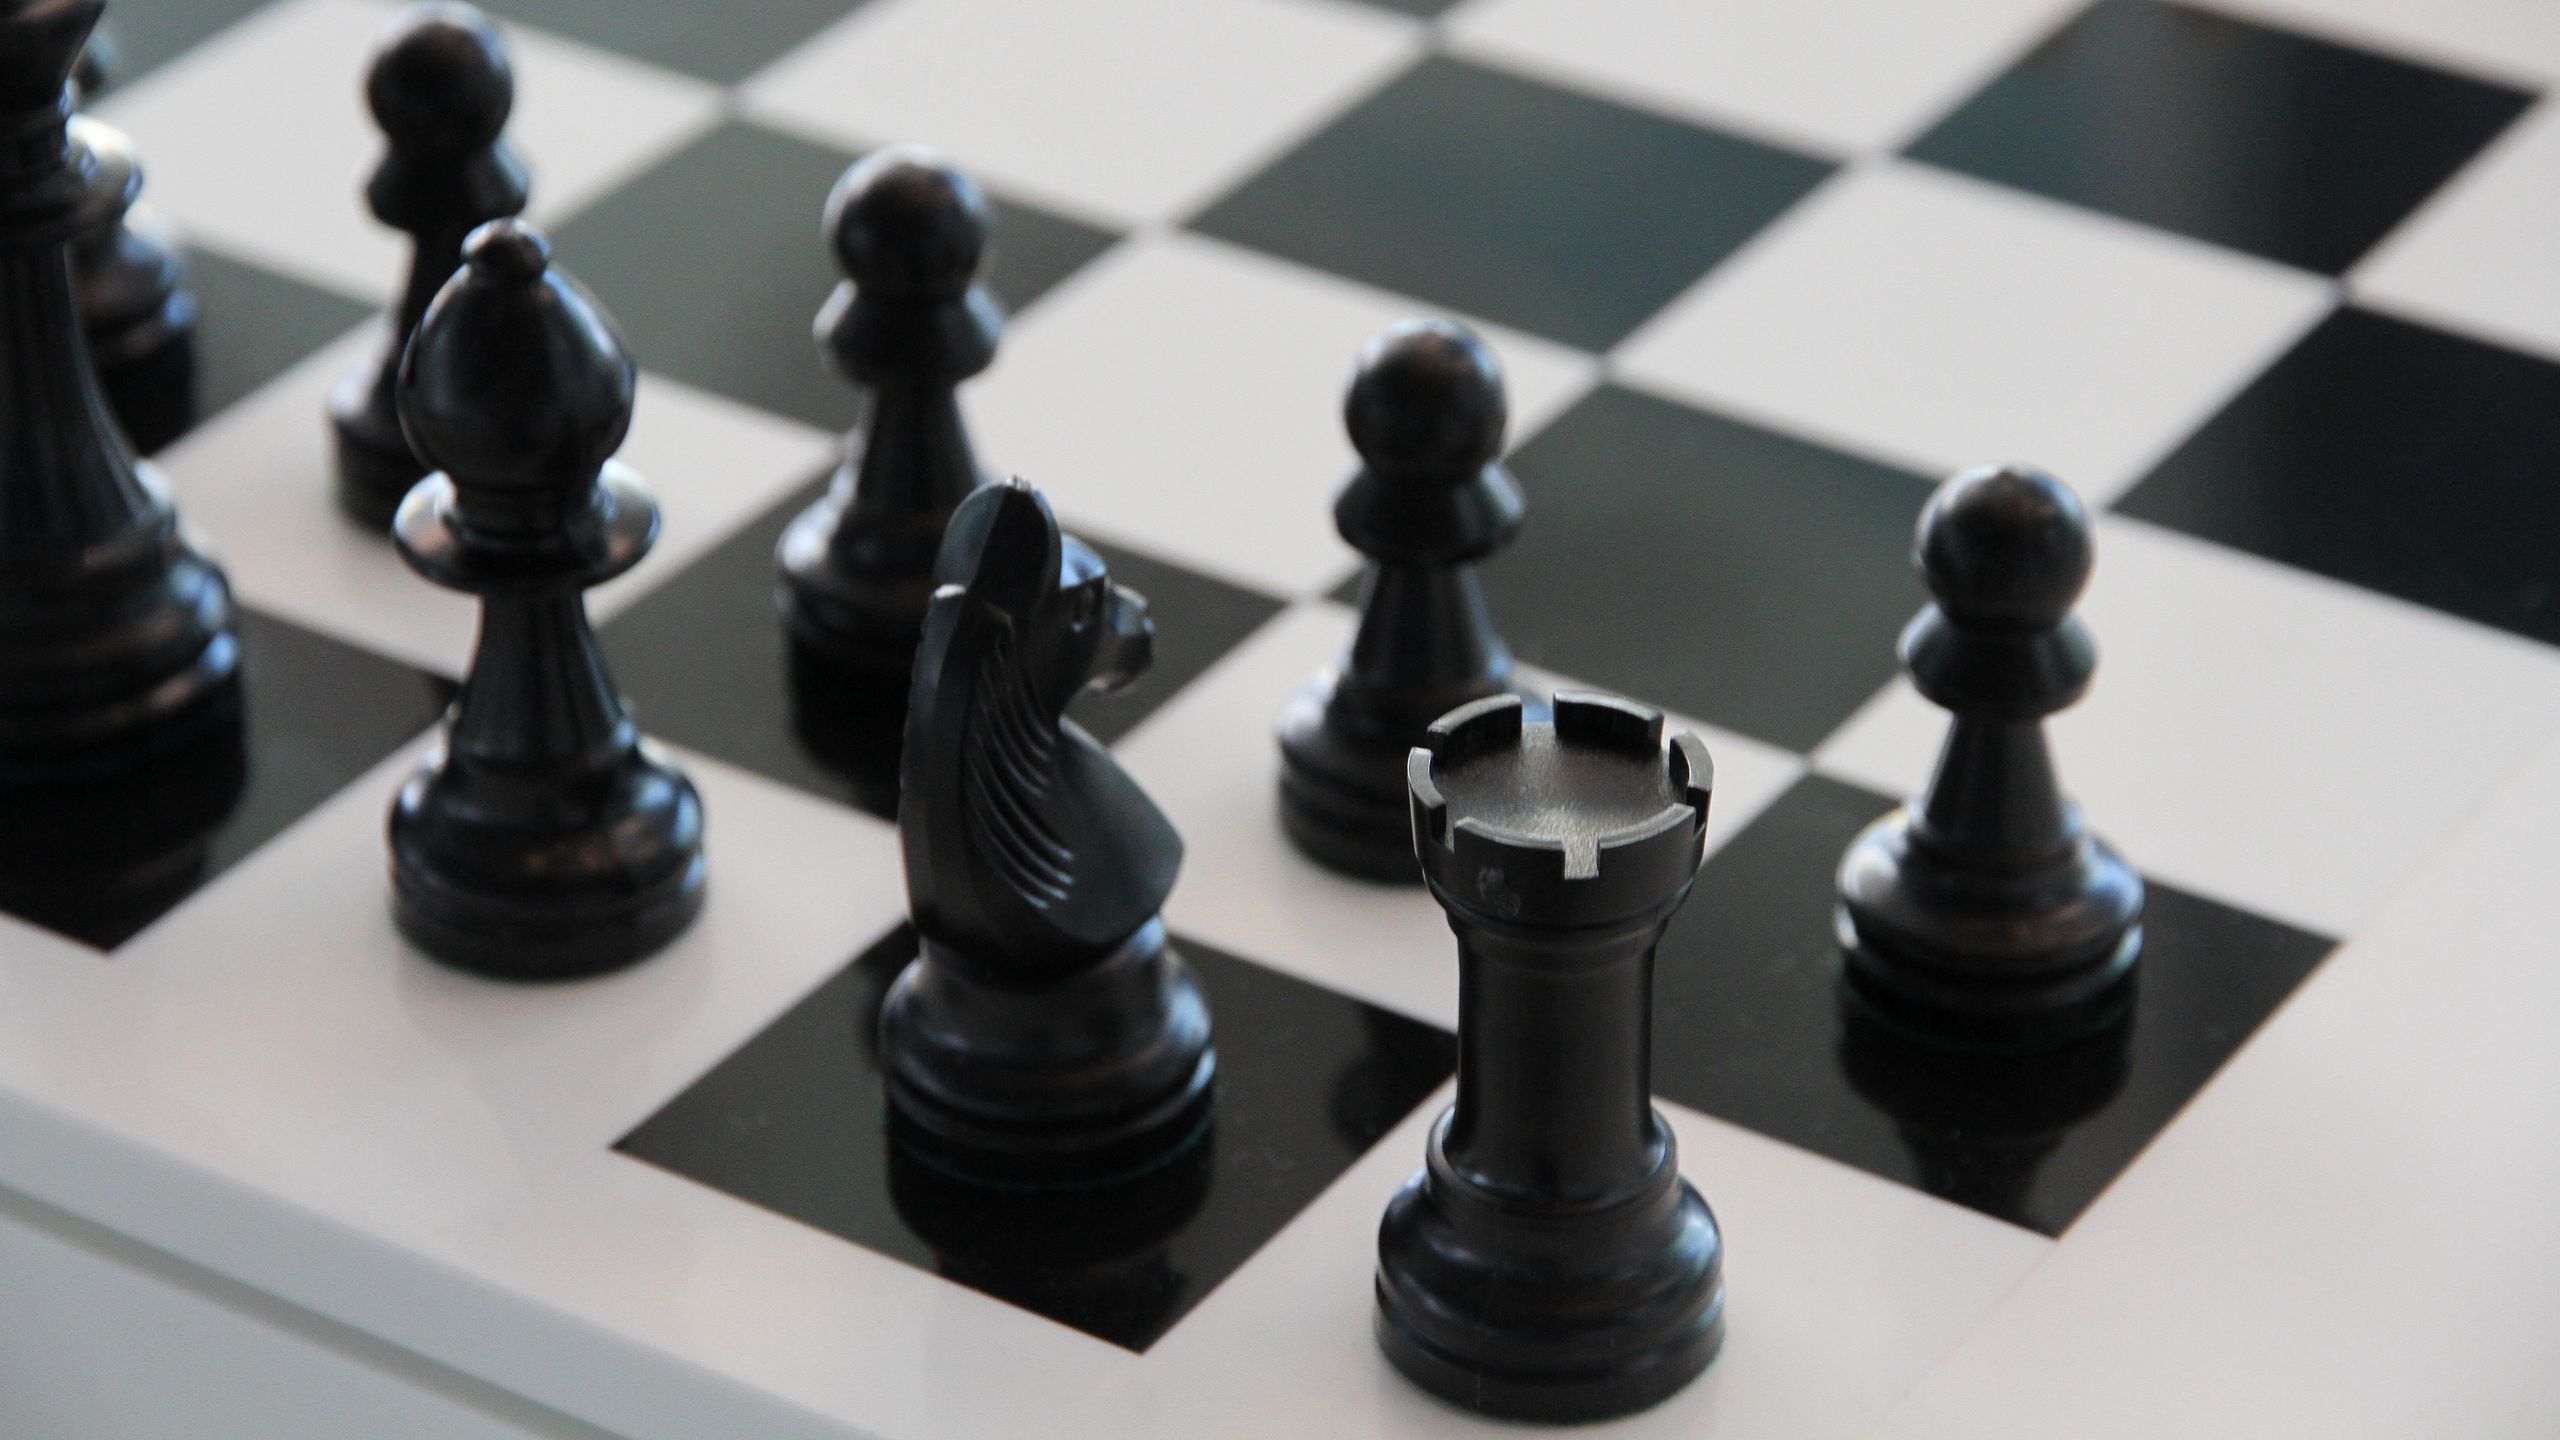 Download wallpaper 2560x1440 chess, chess board, figures widescreen 16:9 HD background